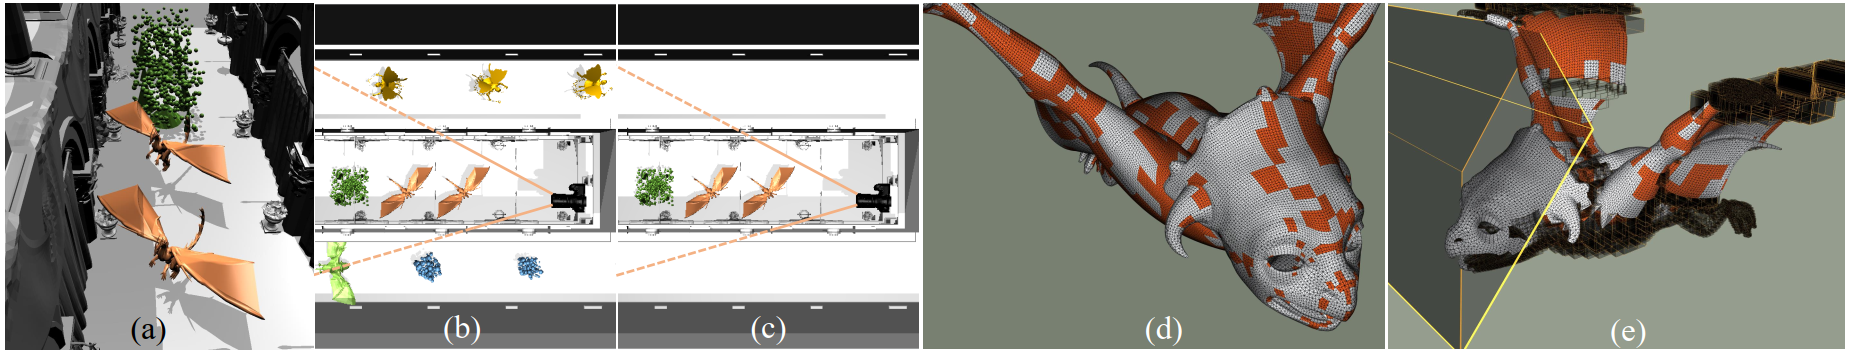 3D rendering of a dragon being created and staged in a 3D modeling program.